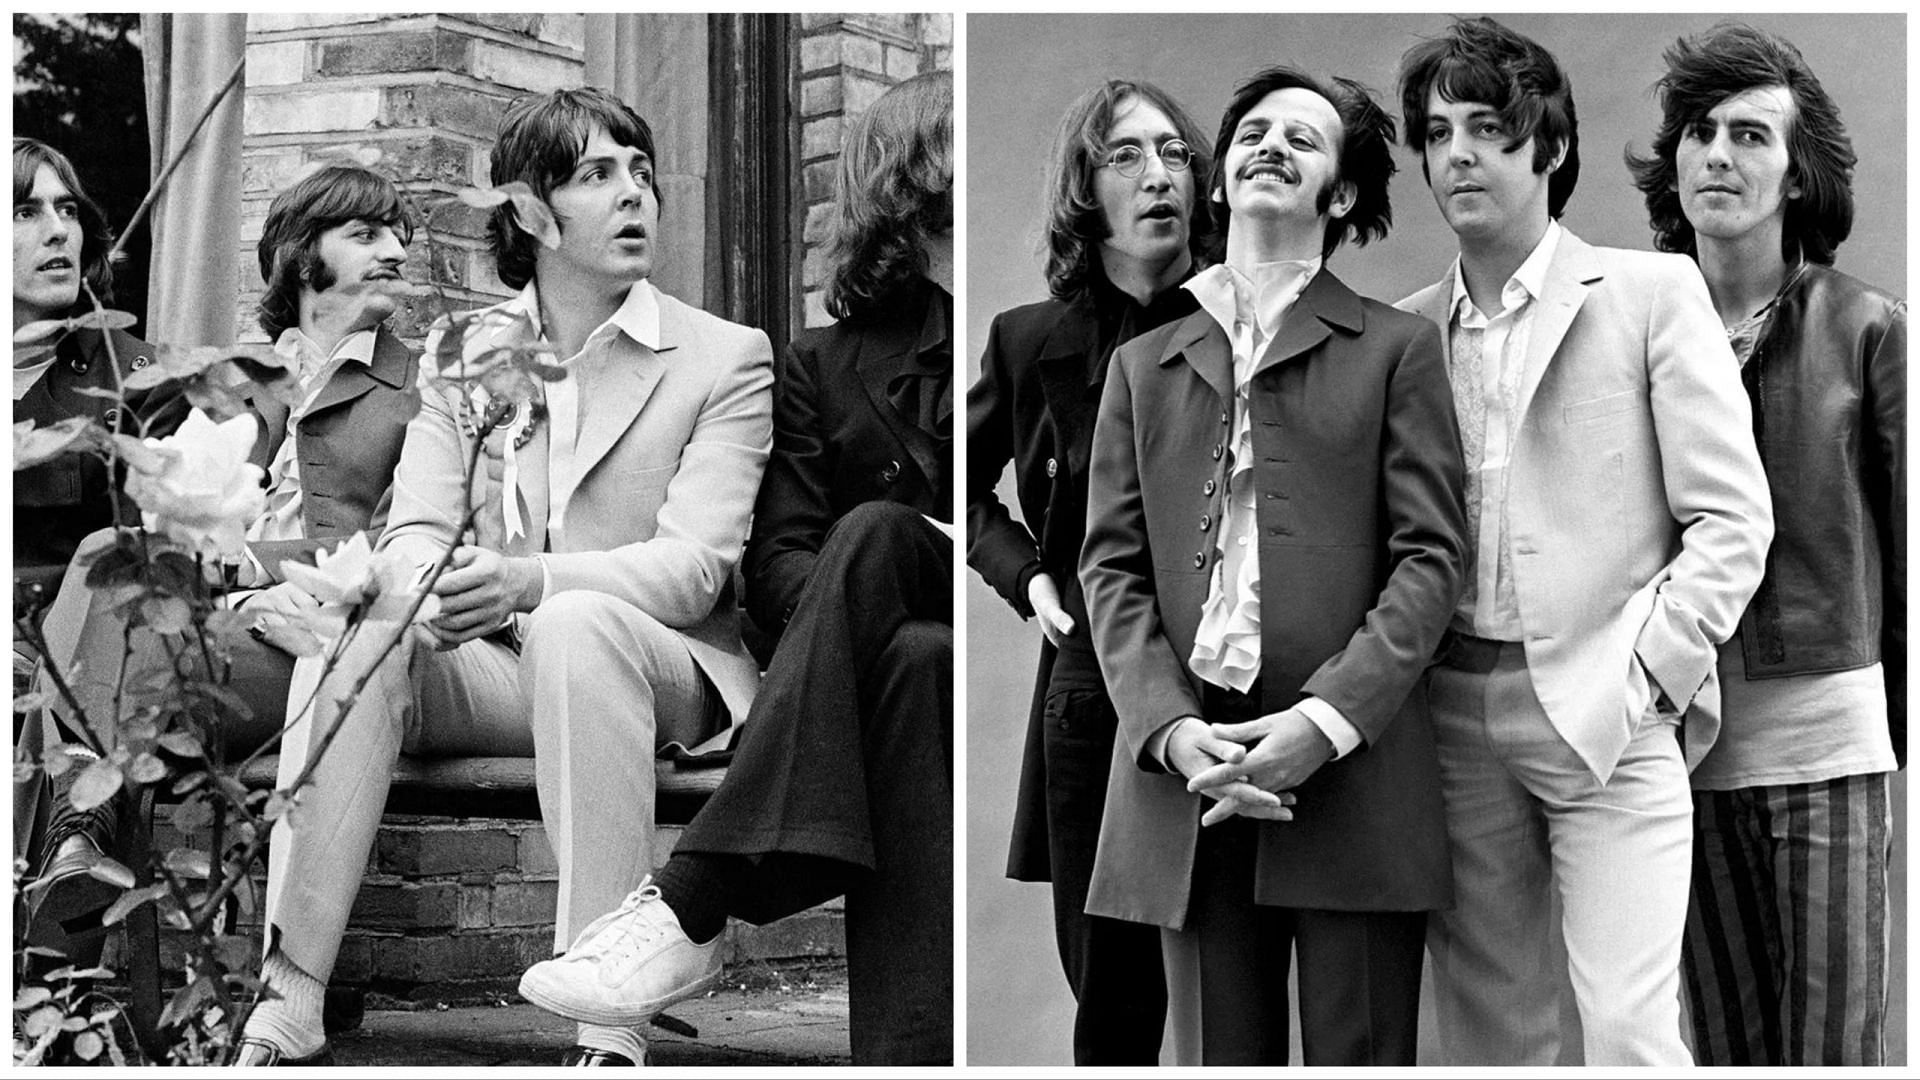 Two portraits of The Beatles (Images via official Instagram @thebeatles)